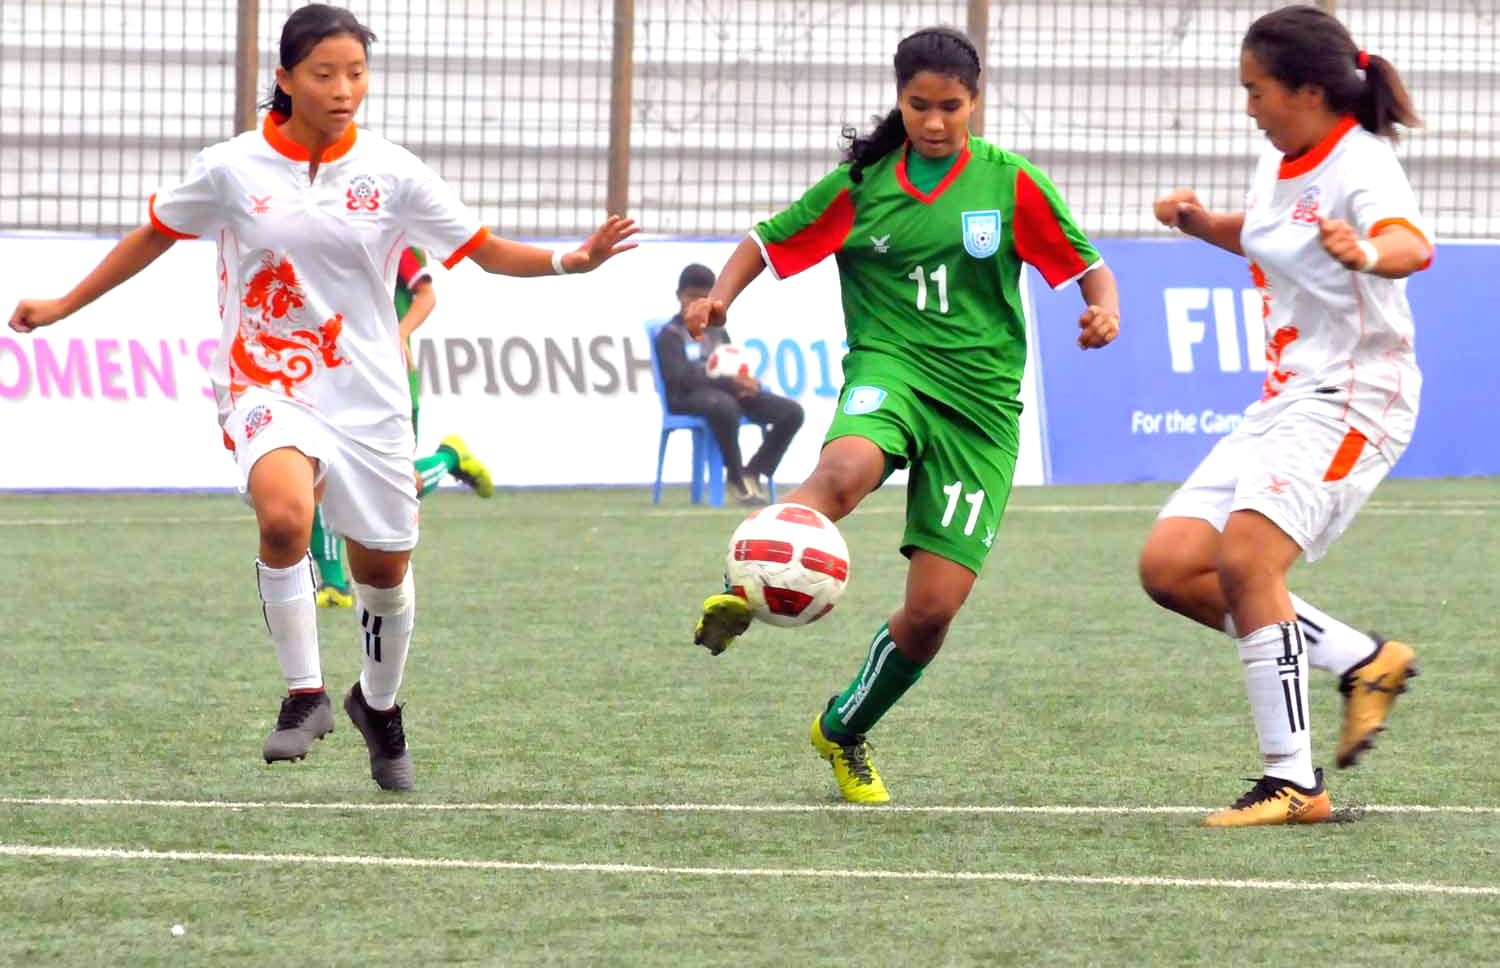 SAFF U-15 Championship: Bangladesh, India girls in final with thumping group stage wins